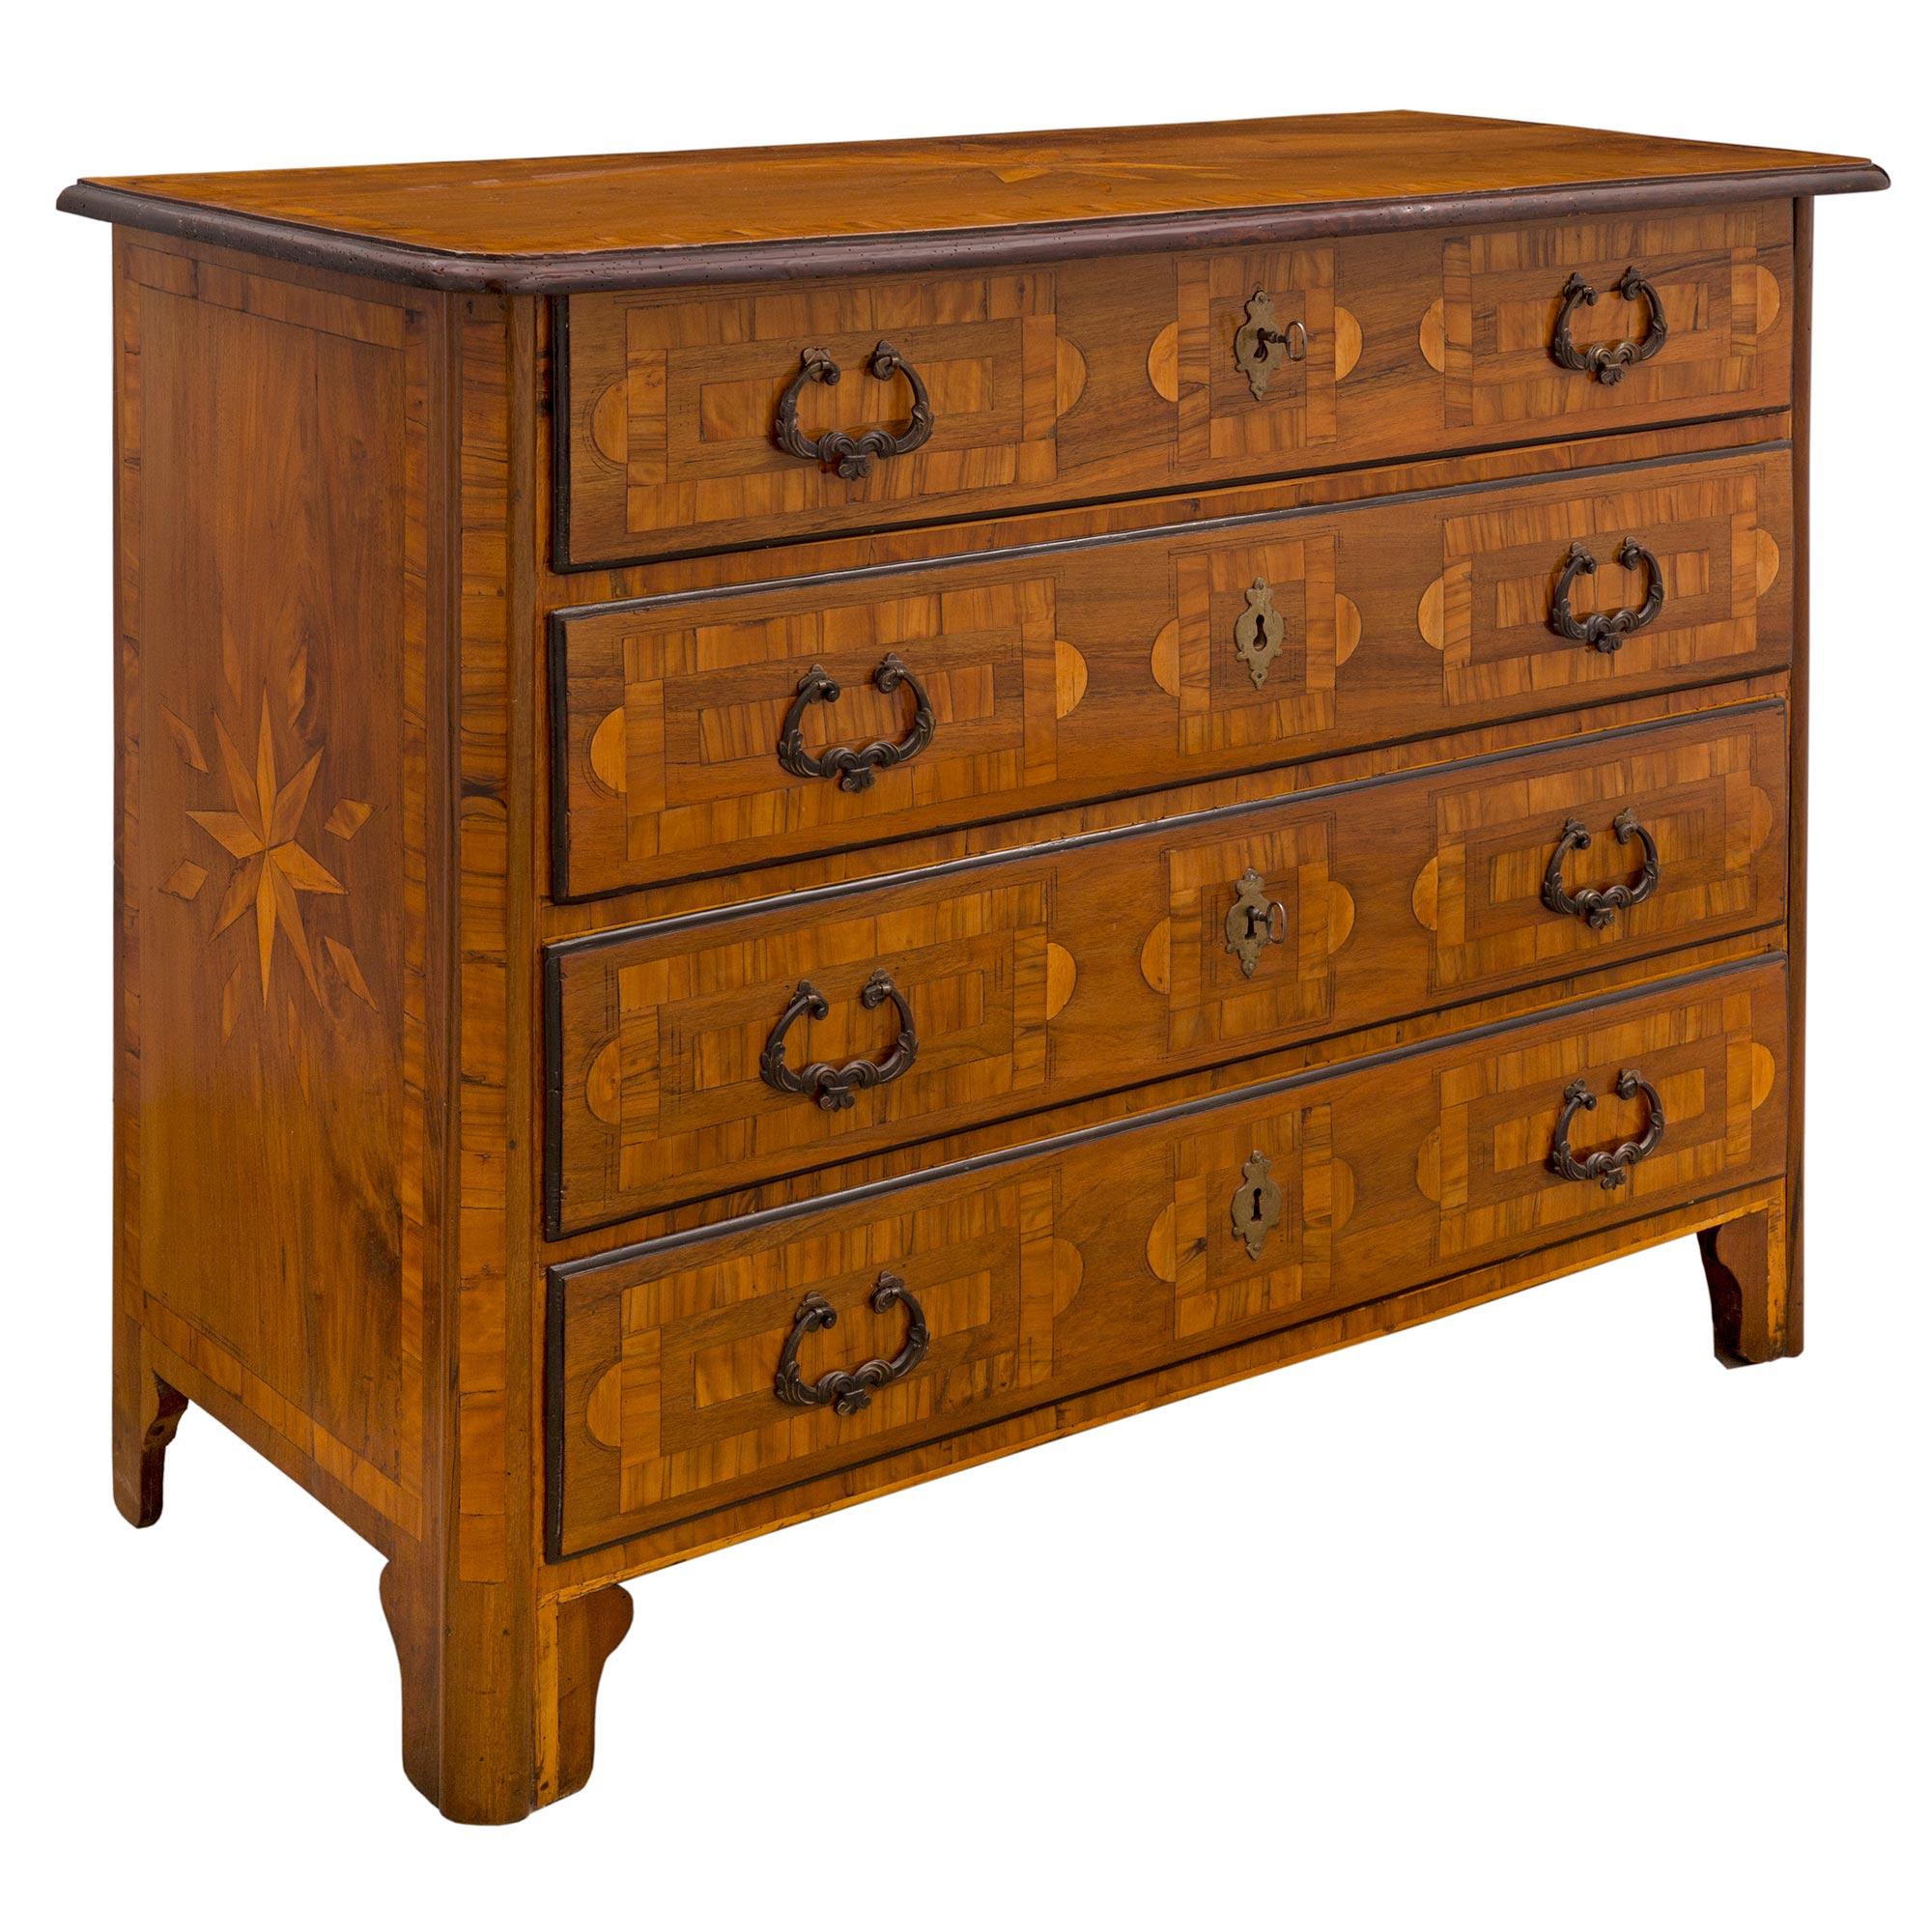 Italian 18th Century Walnut and Fruitwood Commode, from the Piedmont Region In Good Condition For Sale In West Palm Beach, FL